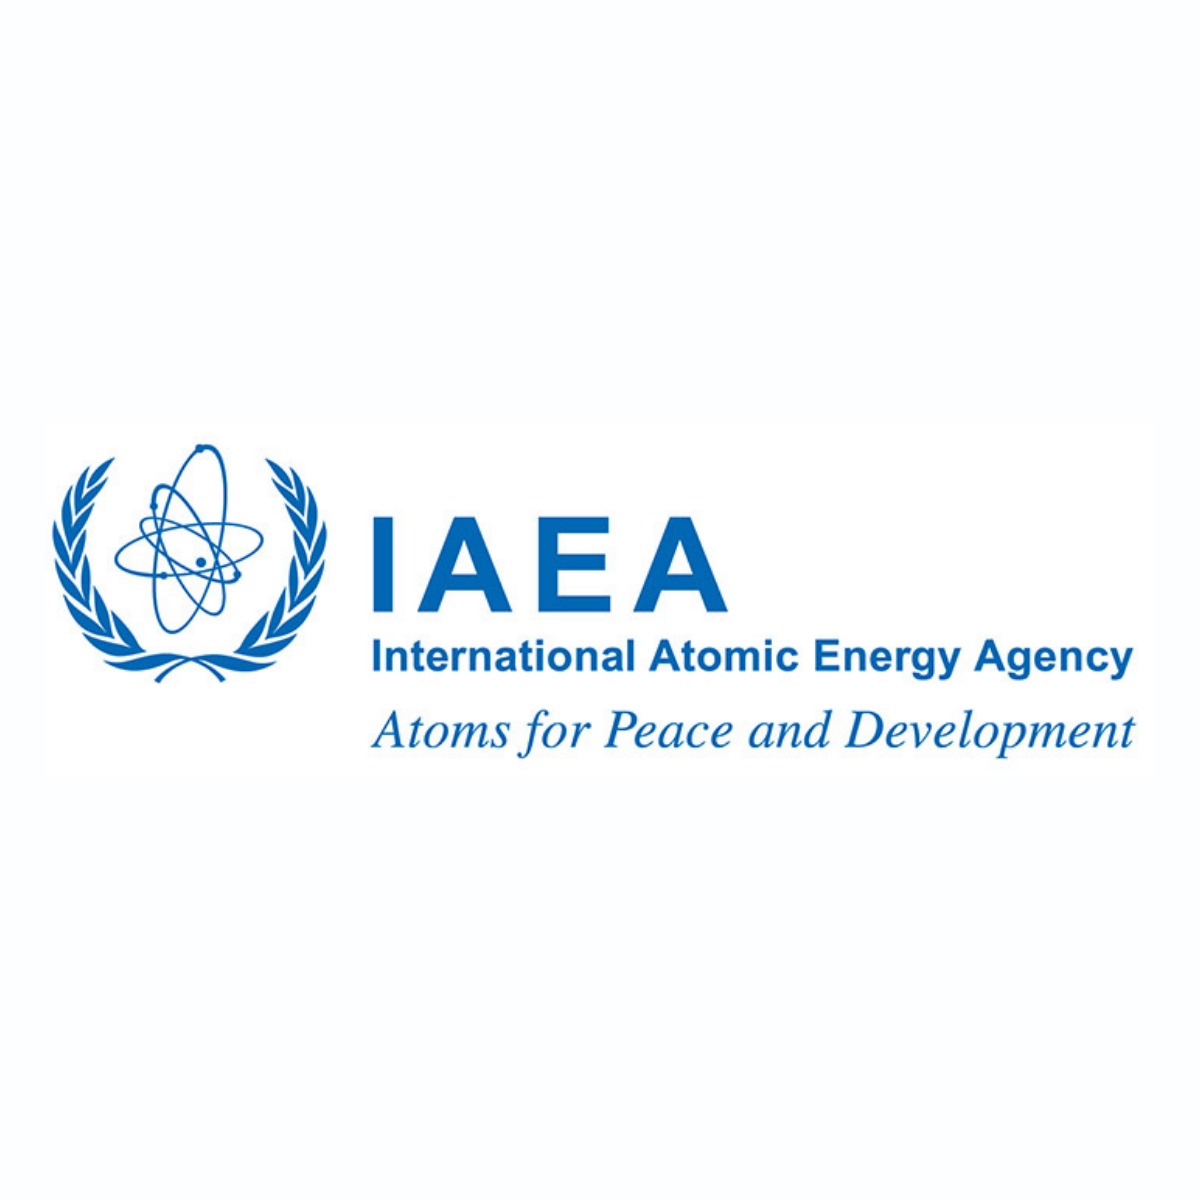 Organized In Cooperation With The International Atomic Energy Agency (IAEA)